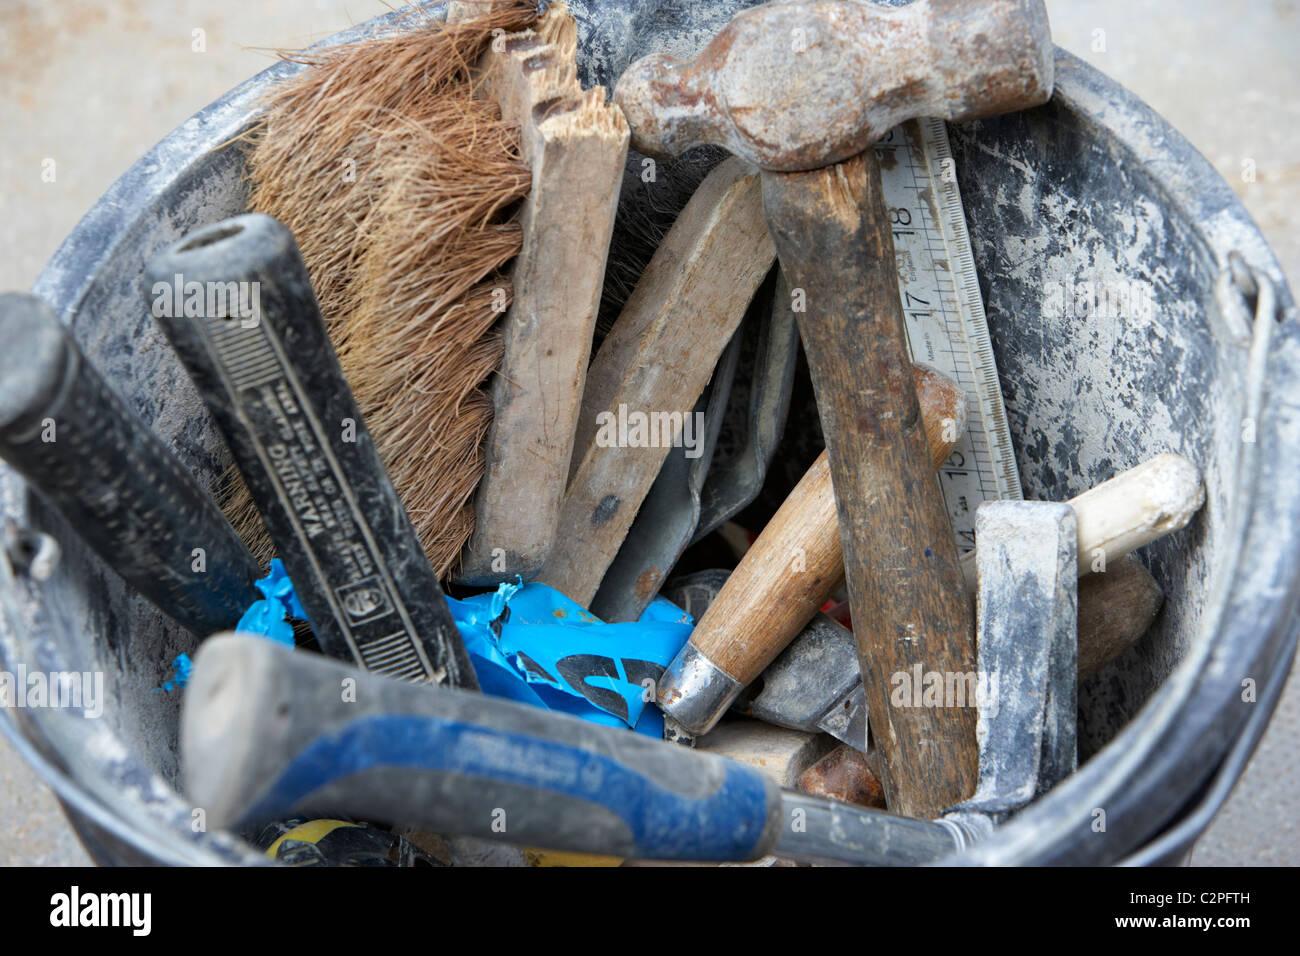 tools used by a bricklayer